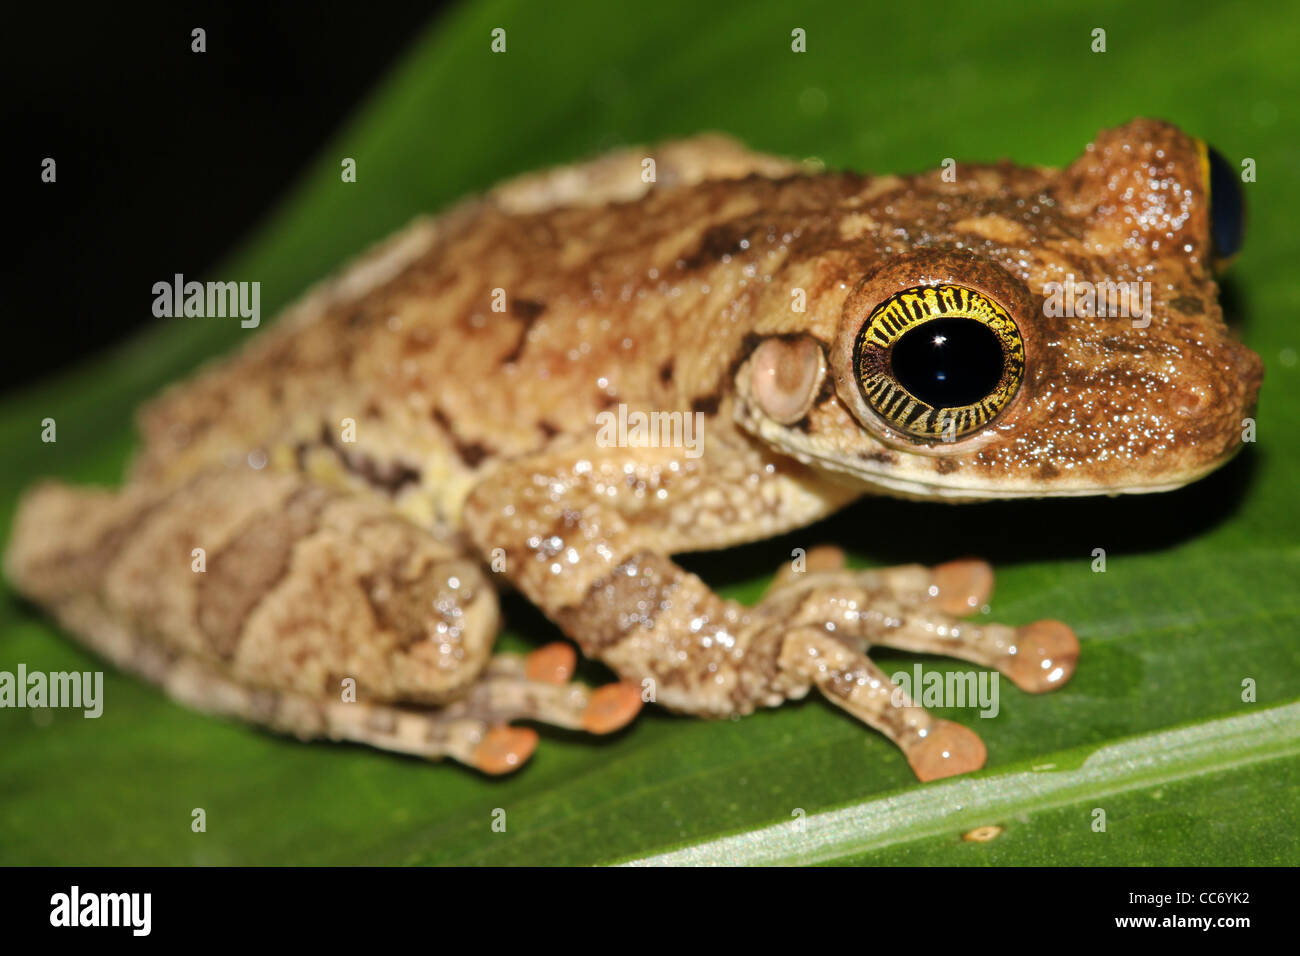 A Giant Broad-headed Treefrog (Osteocephalus taurinus) in the Peruvian Amazon Isolated on black with lspace for text Stock Photo